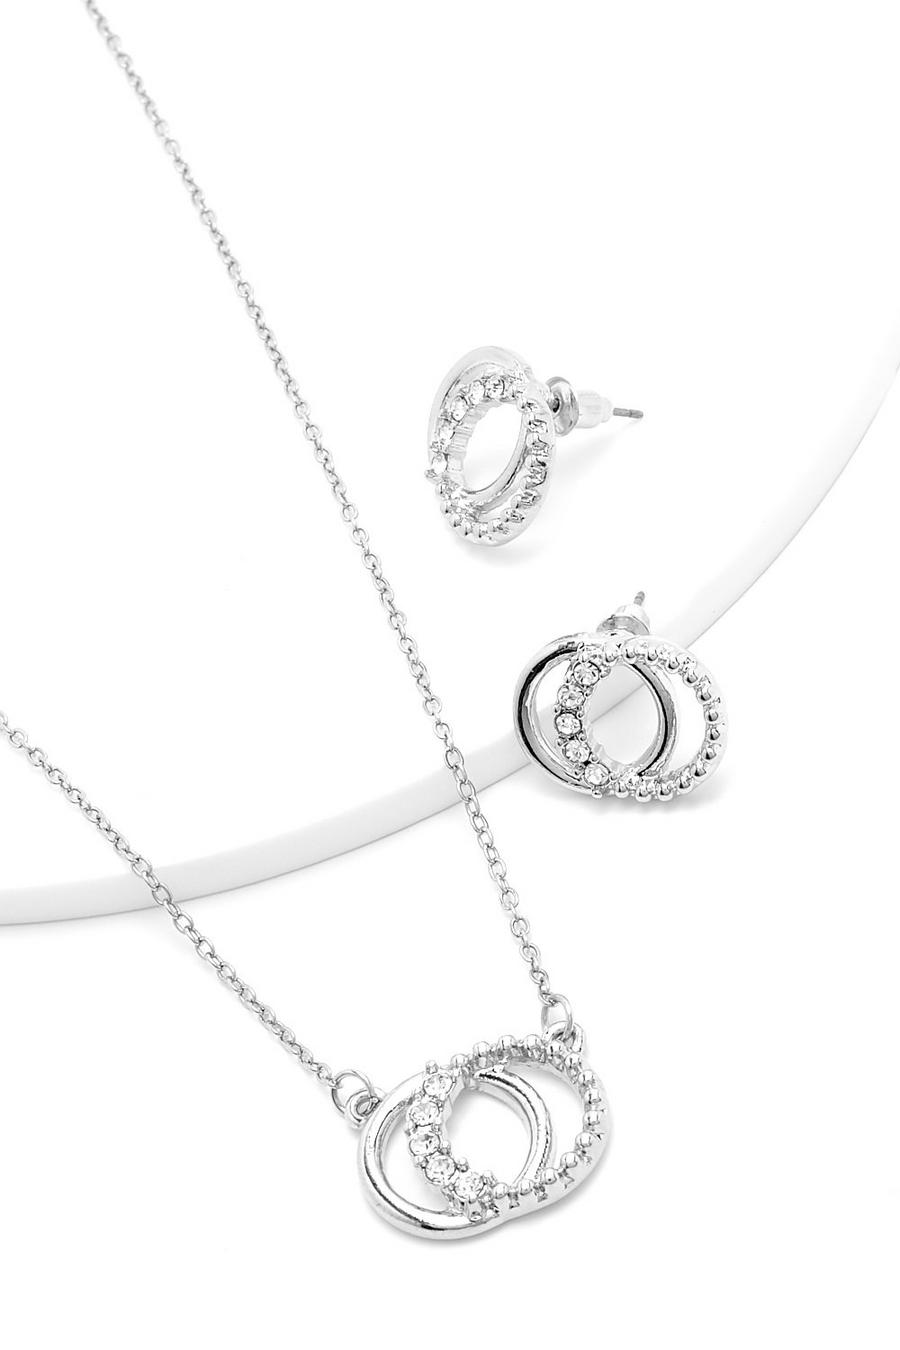 Silver argent Links Necklace And Earring Set 